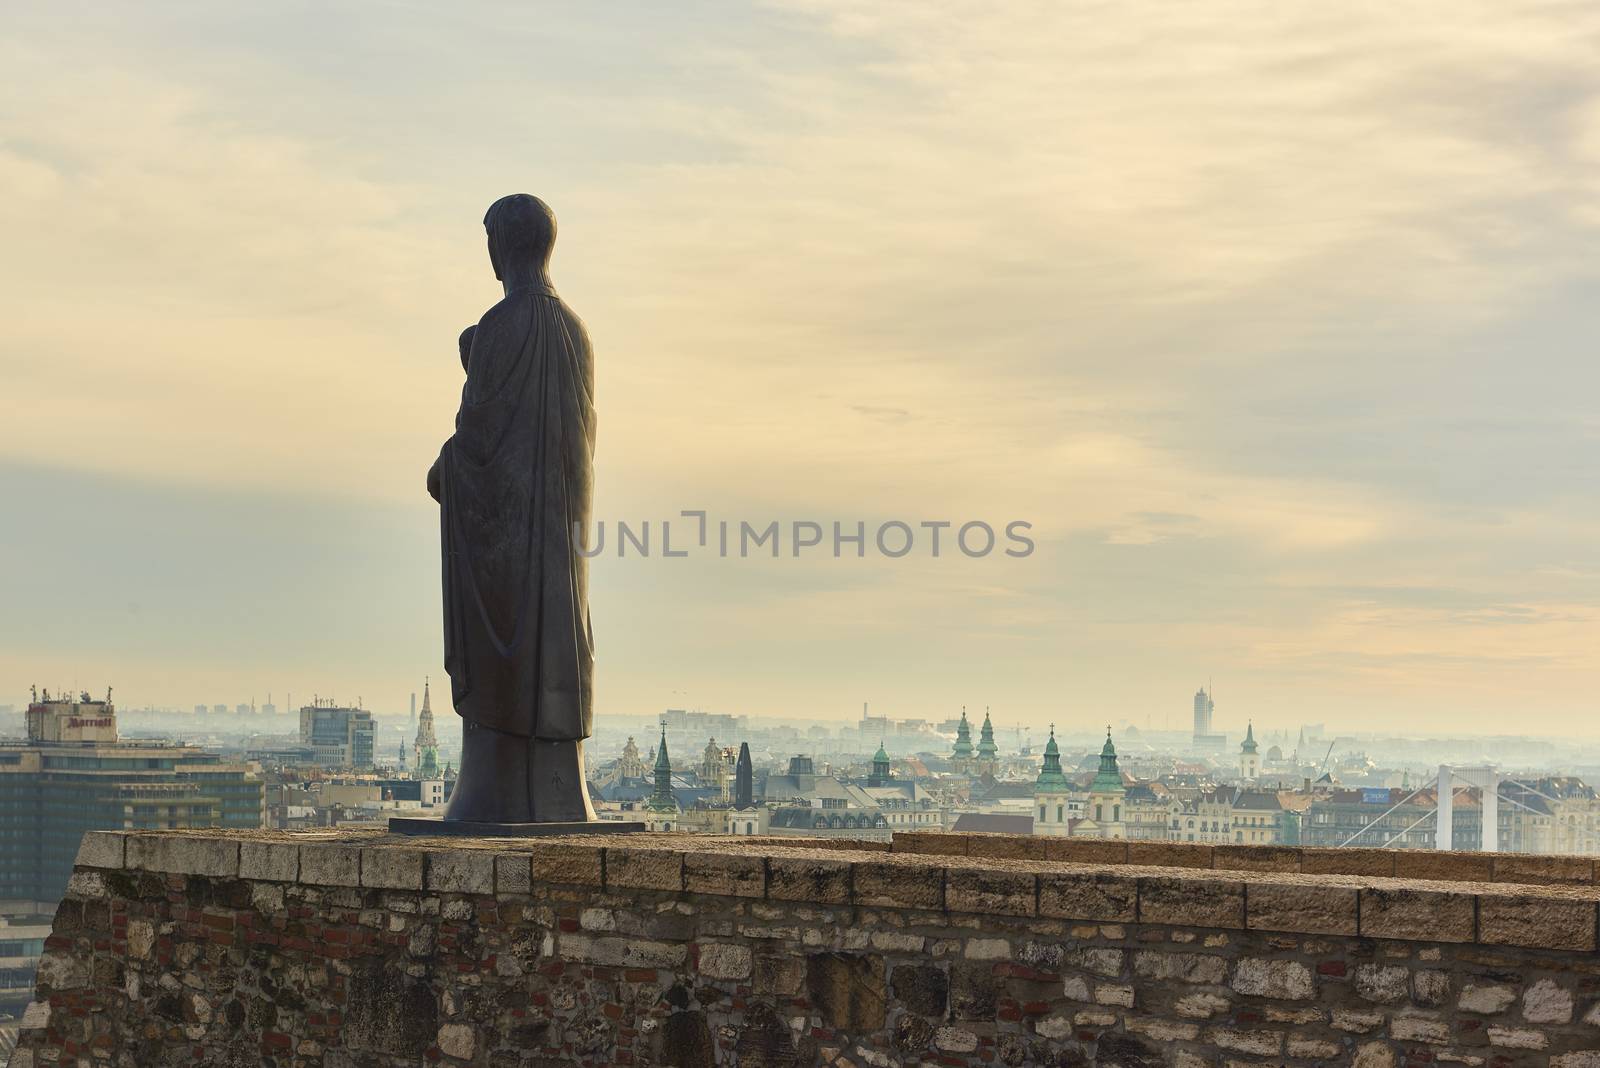 BUDAPEST, HUNGARY - FEBRUARY 02: Bronze statue of Virgin Mary by sculptor Laszlo Matyassy outside Buda Castle, overlooking Budapest city across the Danube river. February 02, 2016 in Budapest.